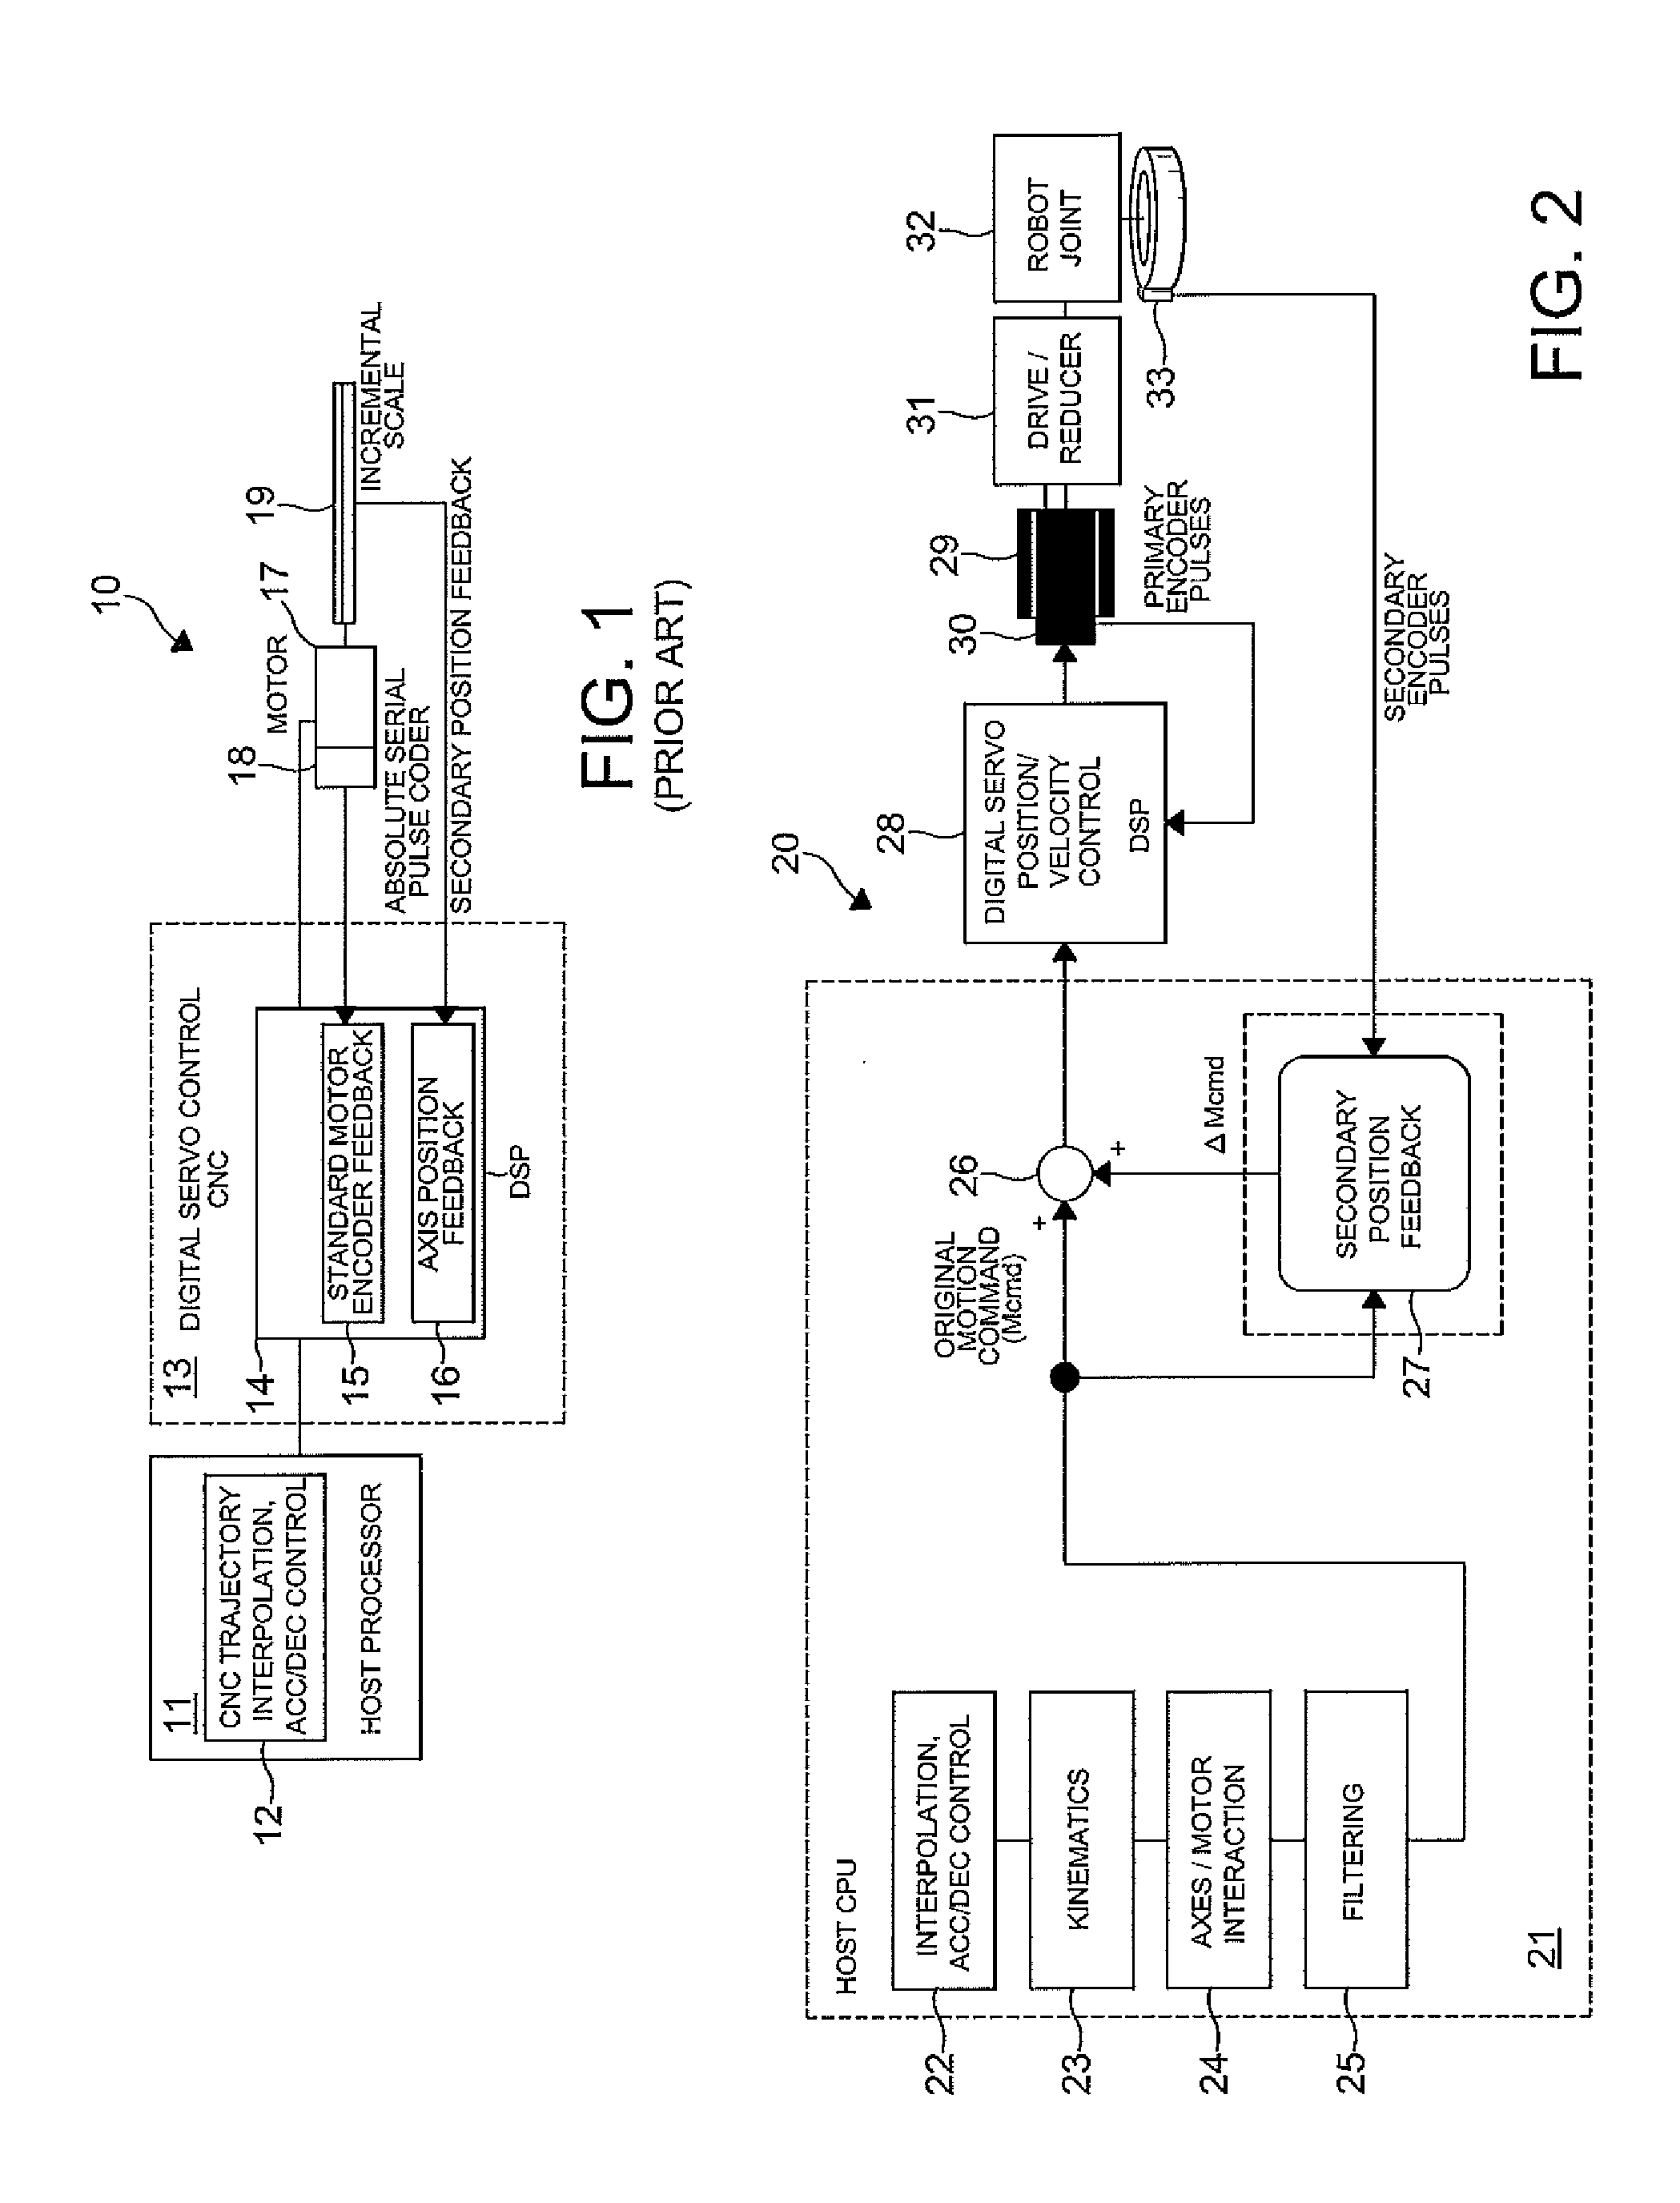 Secondary position feedback control of a robot